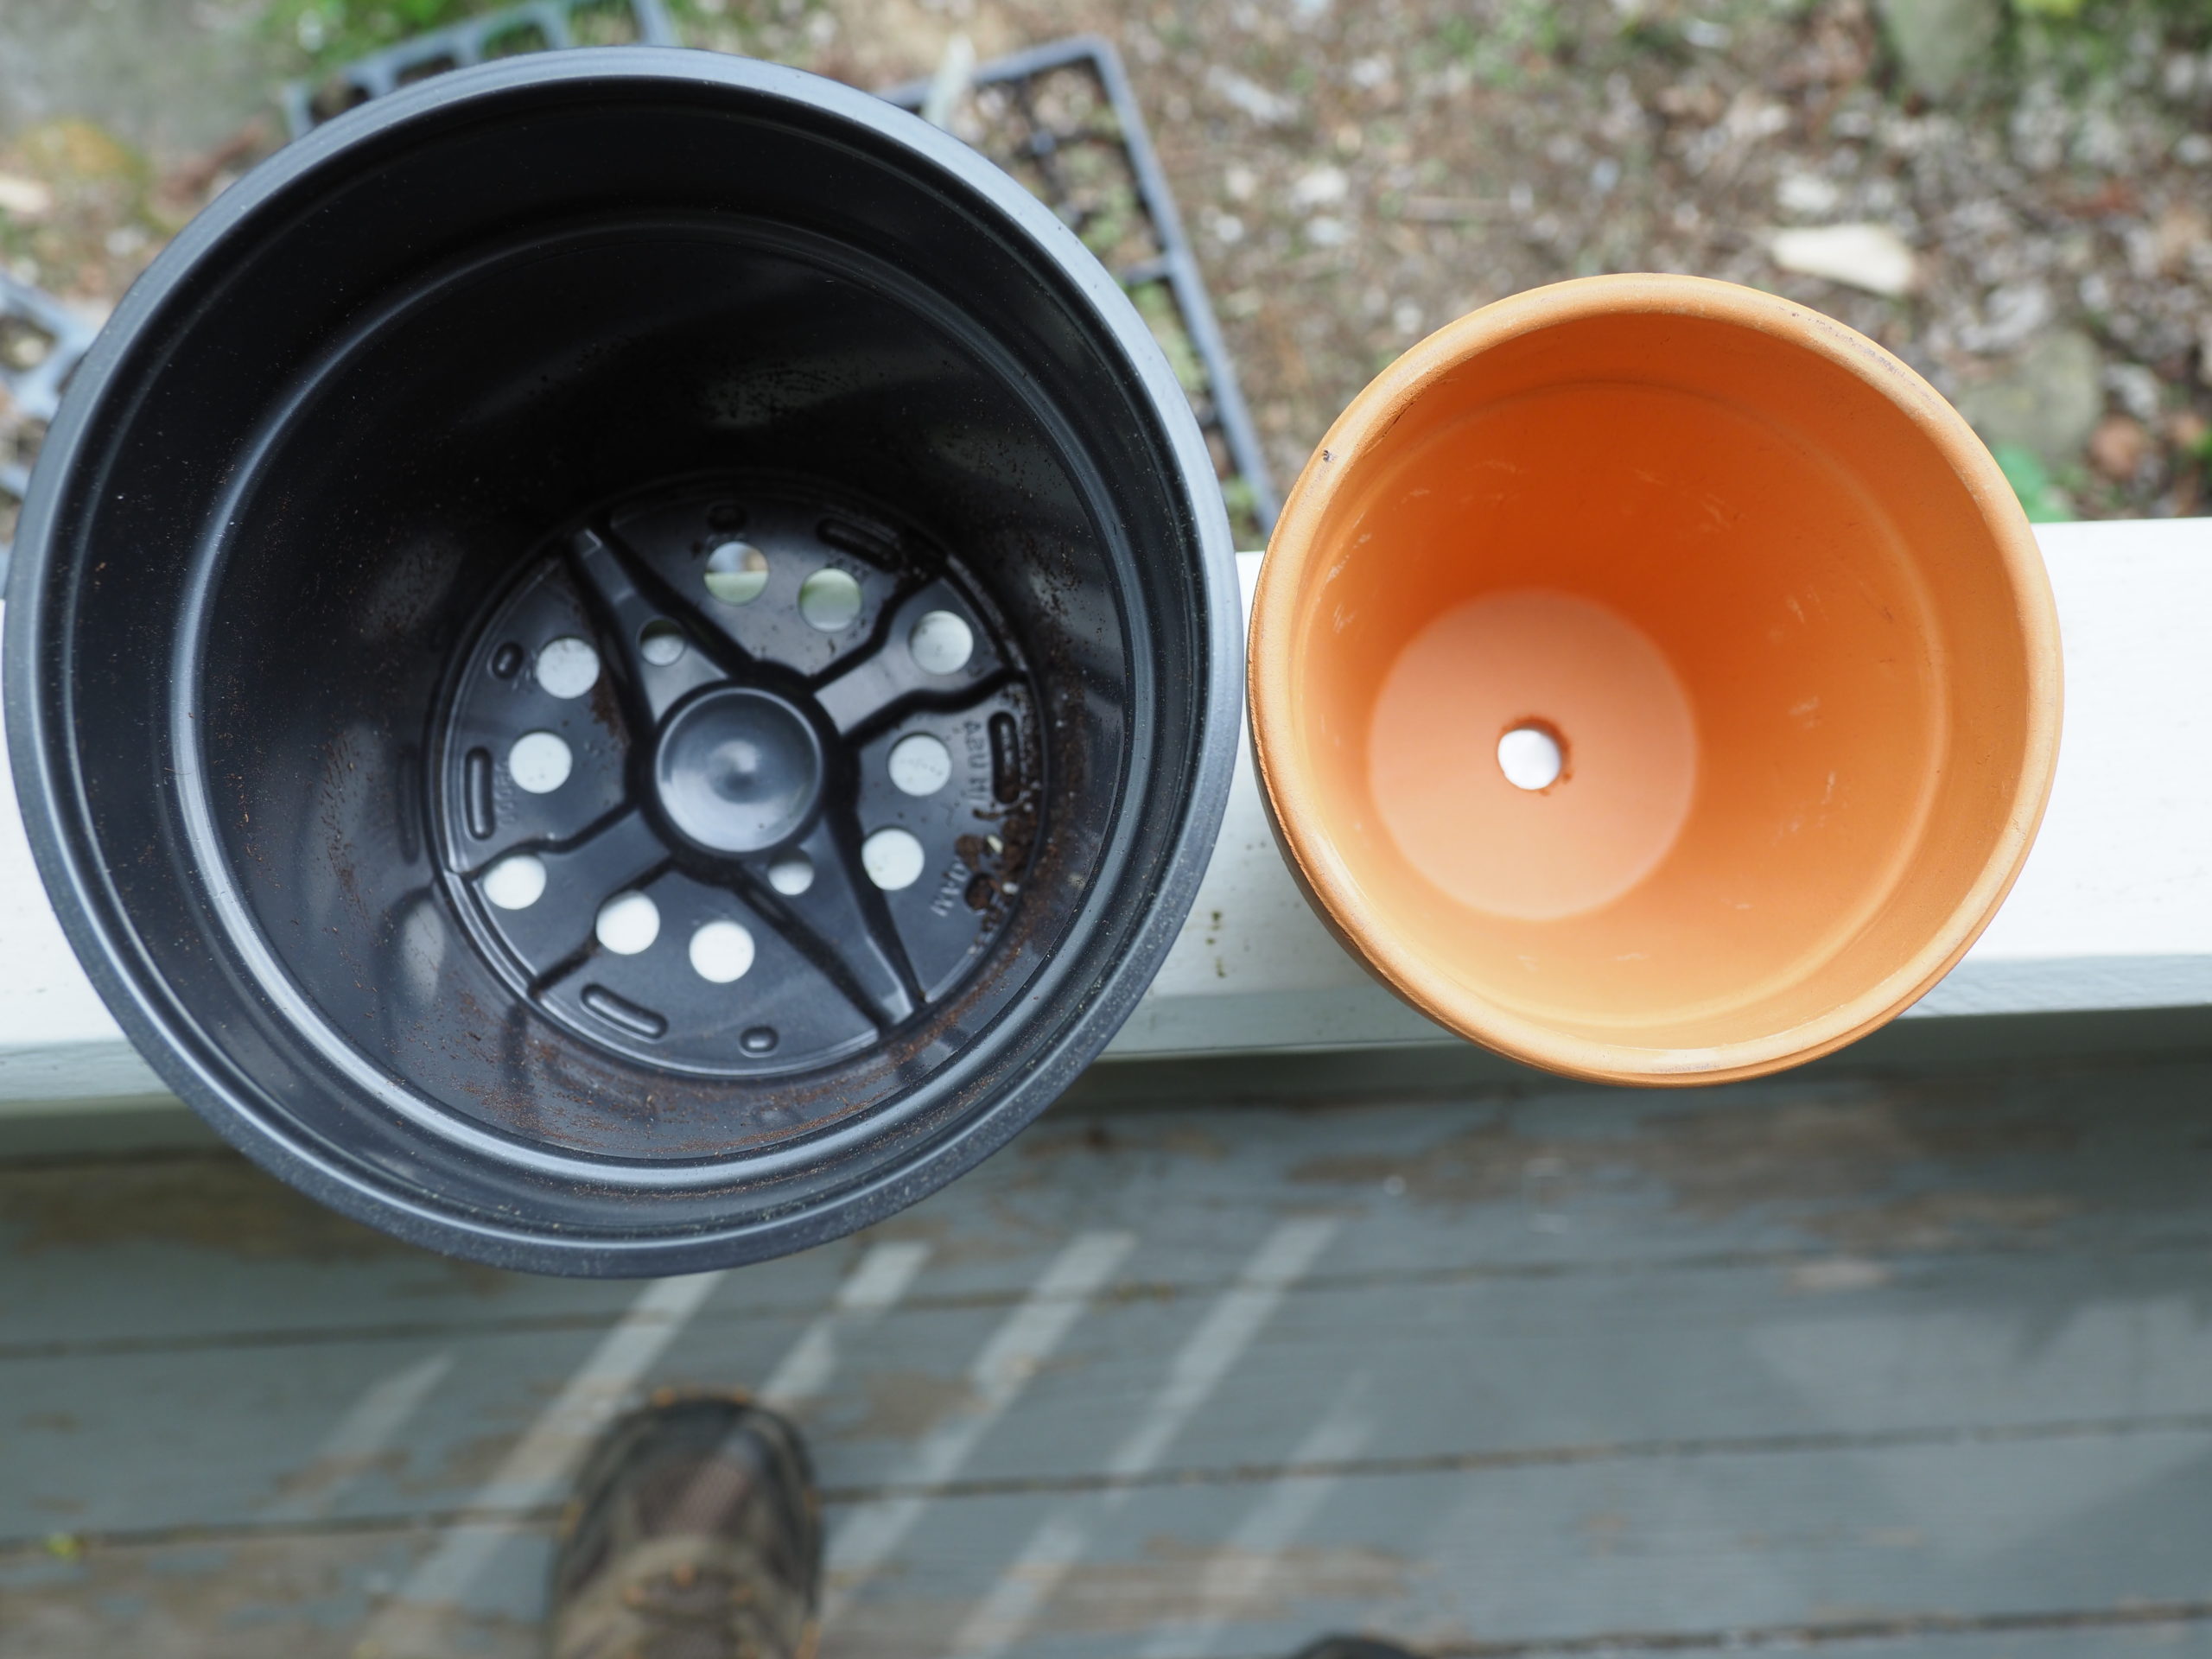 A standard 4-inch clay pot on the right and a 6-inch plastic pot on the left. Note the different drainage holes on each pot. The single drainage hole in the clay pot is all that’s necessary because the clay can “breathe.” The plastic pot, which is not porous like the clay pot, allows for drainage with 10 small holes and one larger center drainage hole to compensate. ANDREW MESSINGER